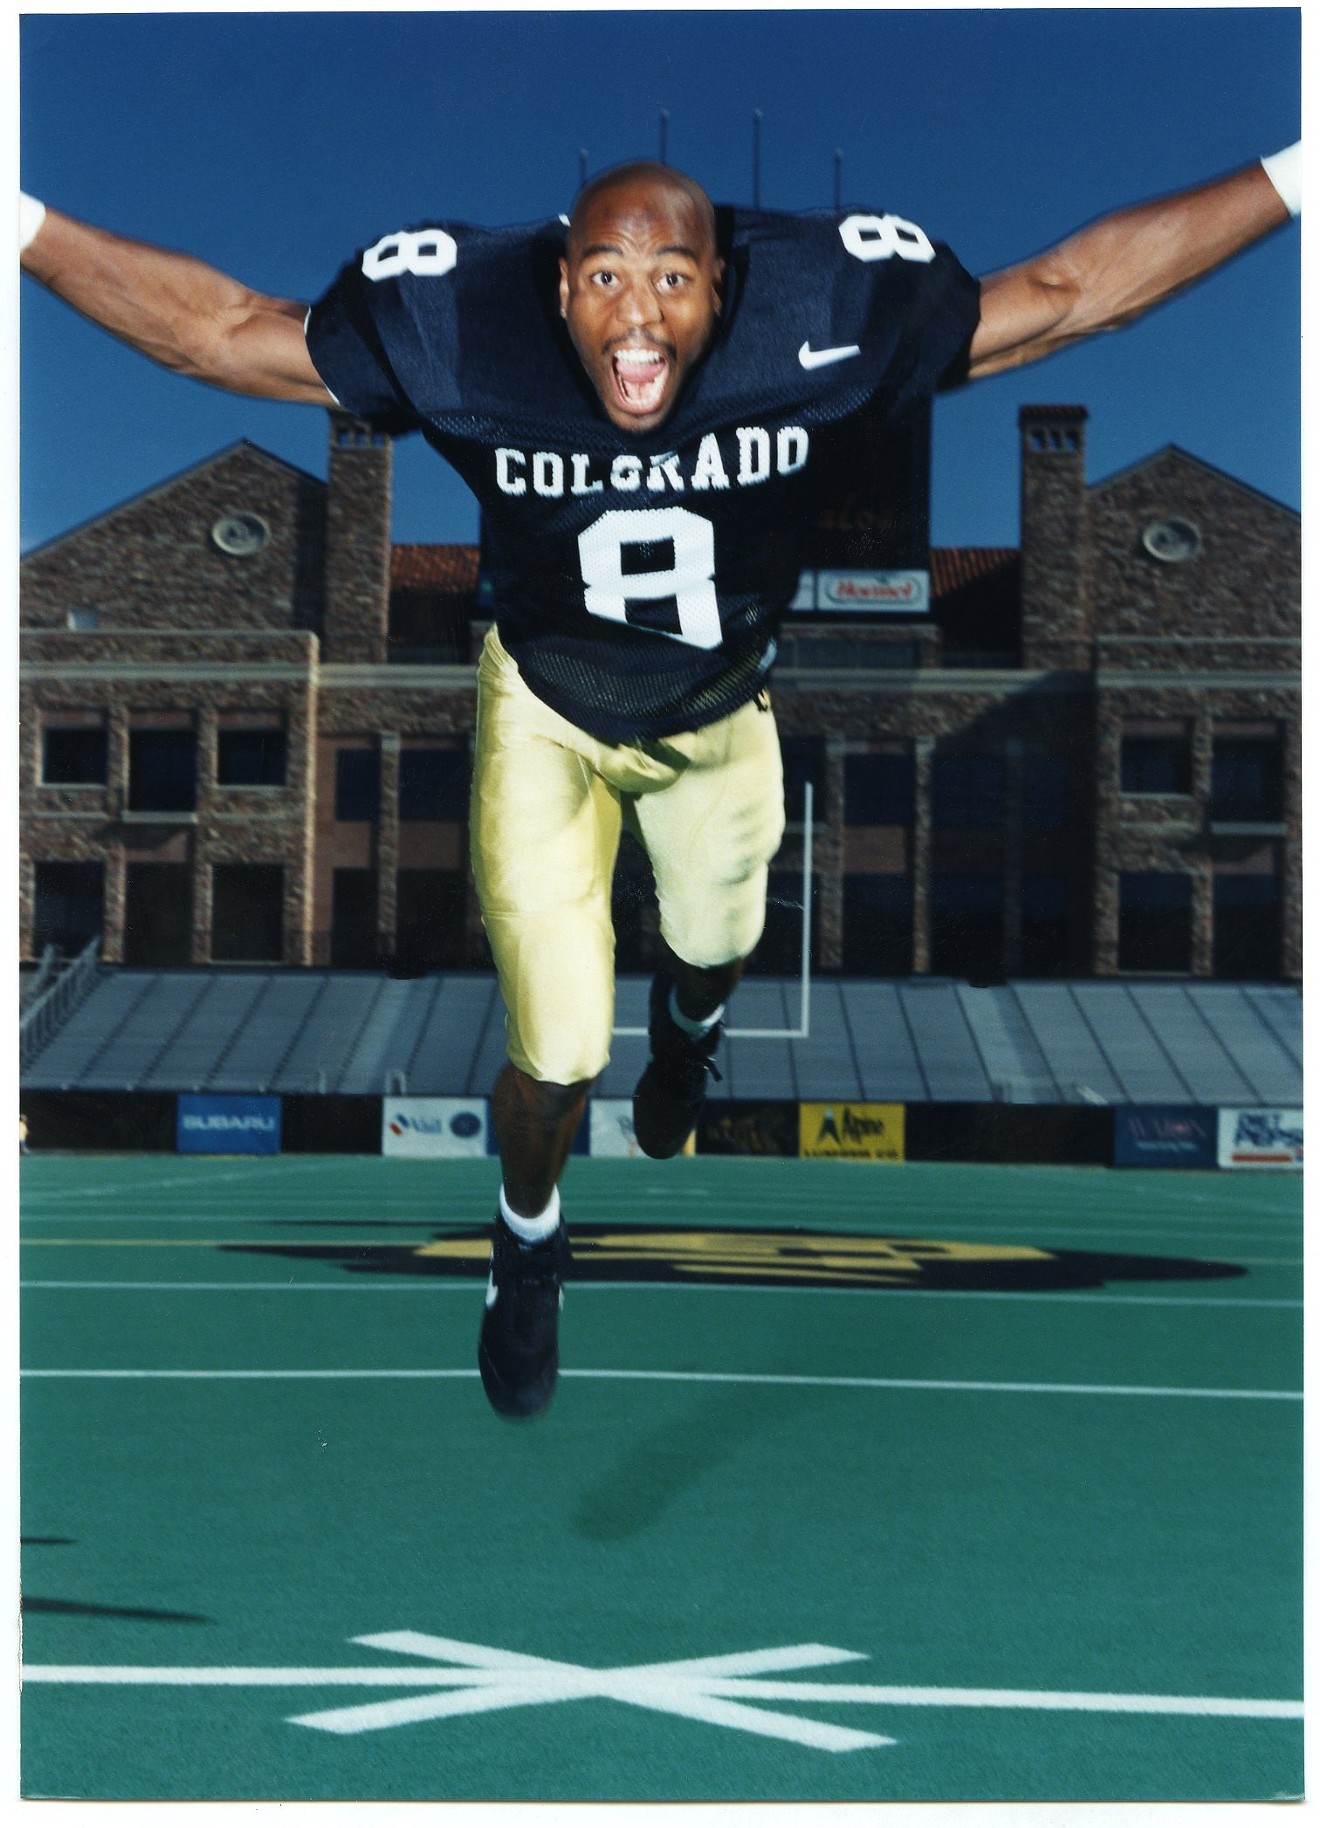 T.J. Cunningham once played defensive back for the Buffs.